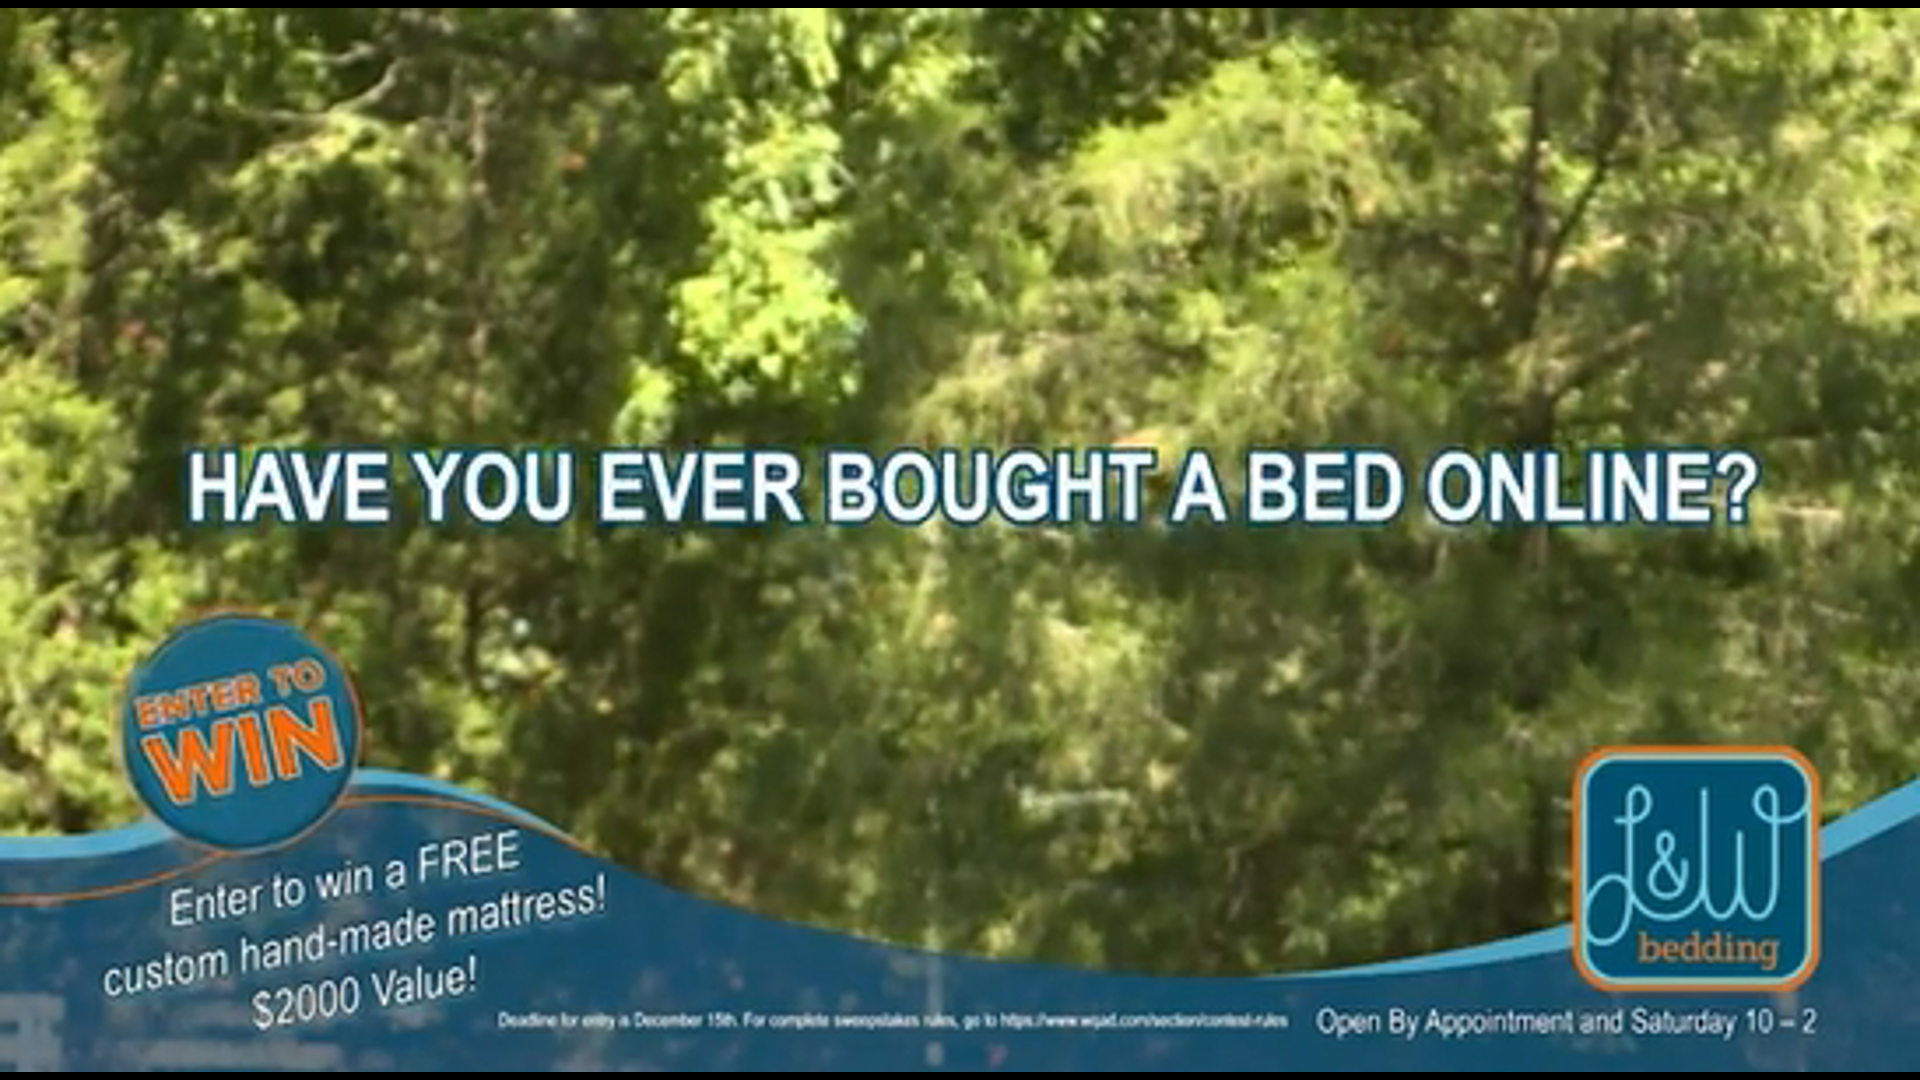 Have you ever been unsatisfied with a bed in a box? Tell us about it for a chance to win a free bed from L&W Bedding!